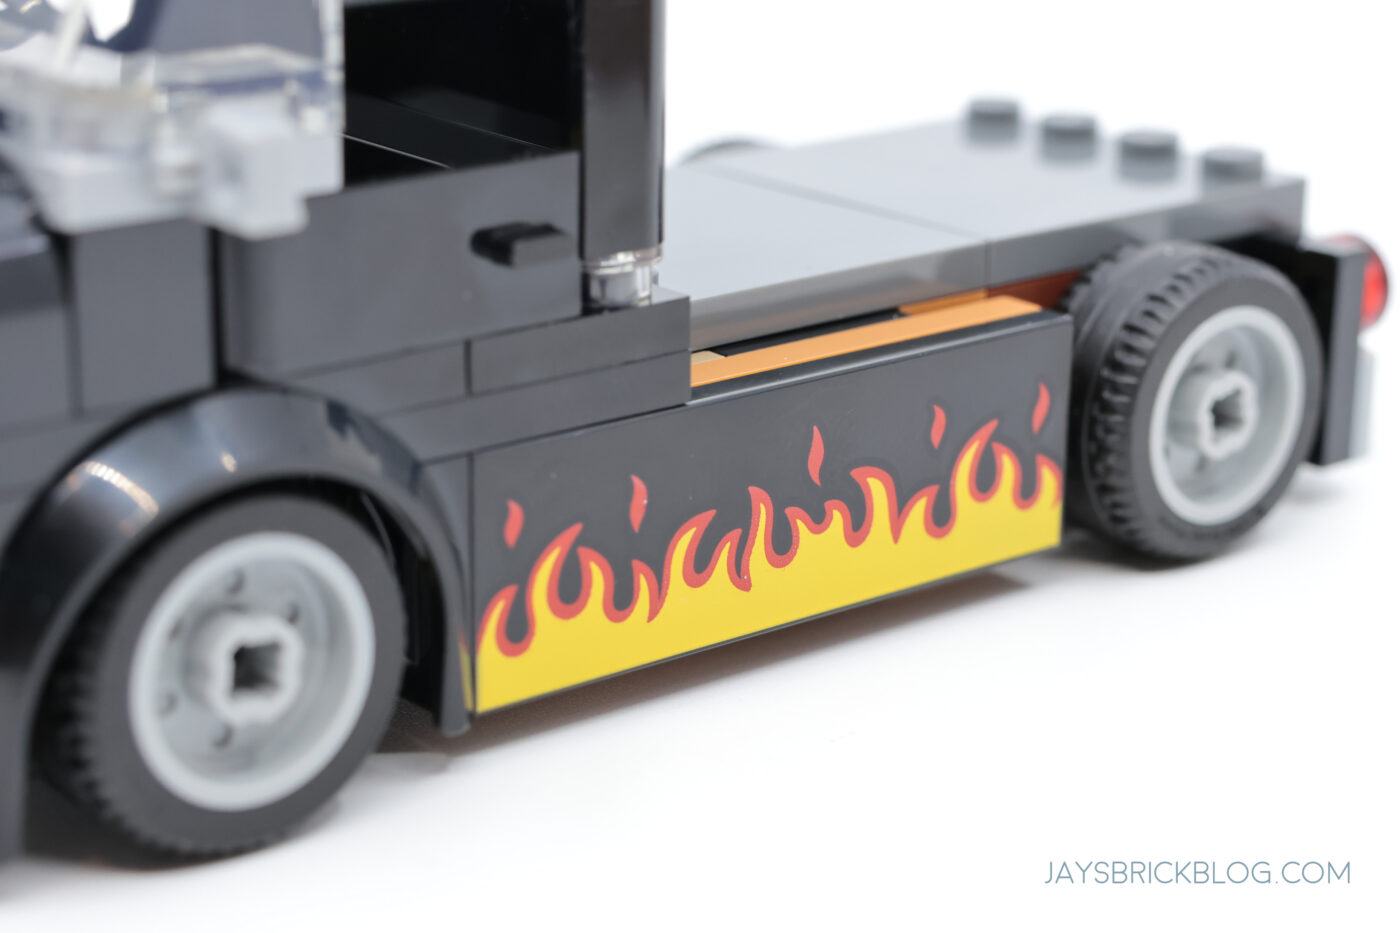 Review: LEGO 60404 Burger Truck9